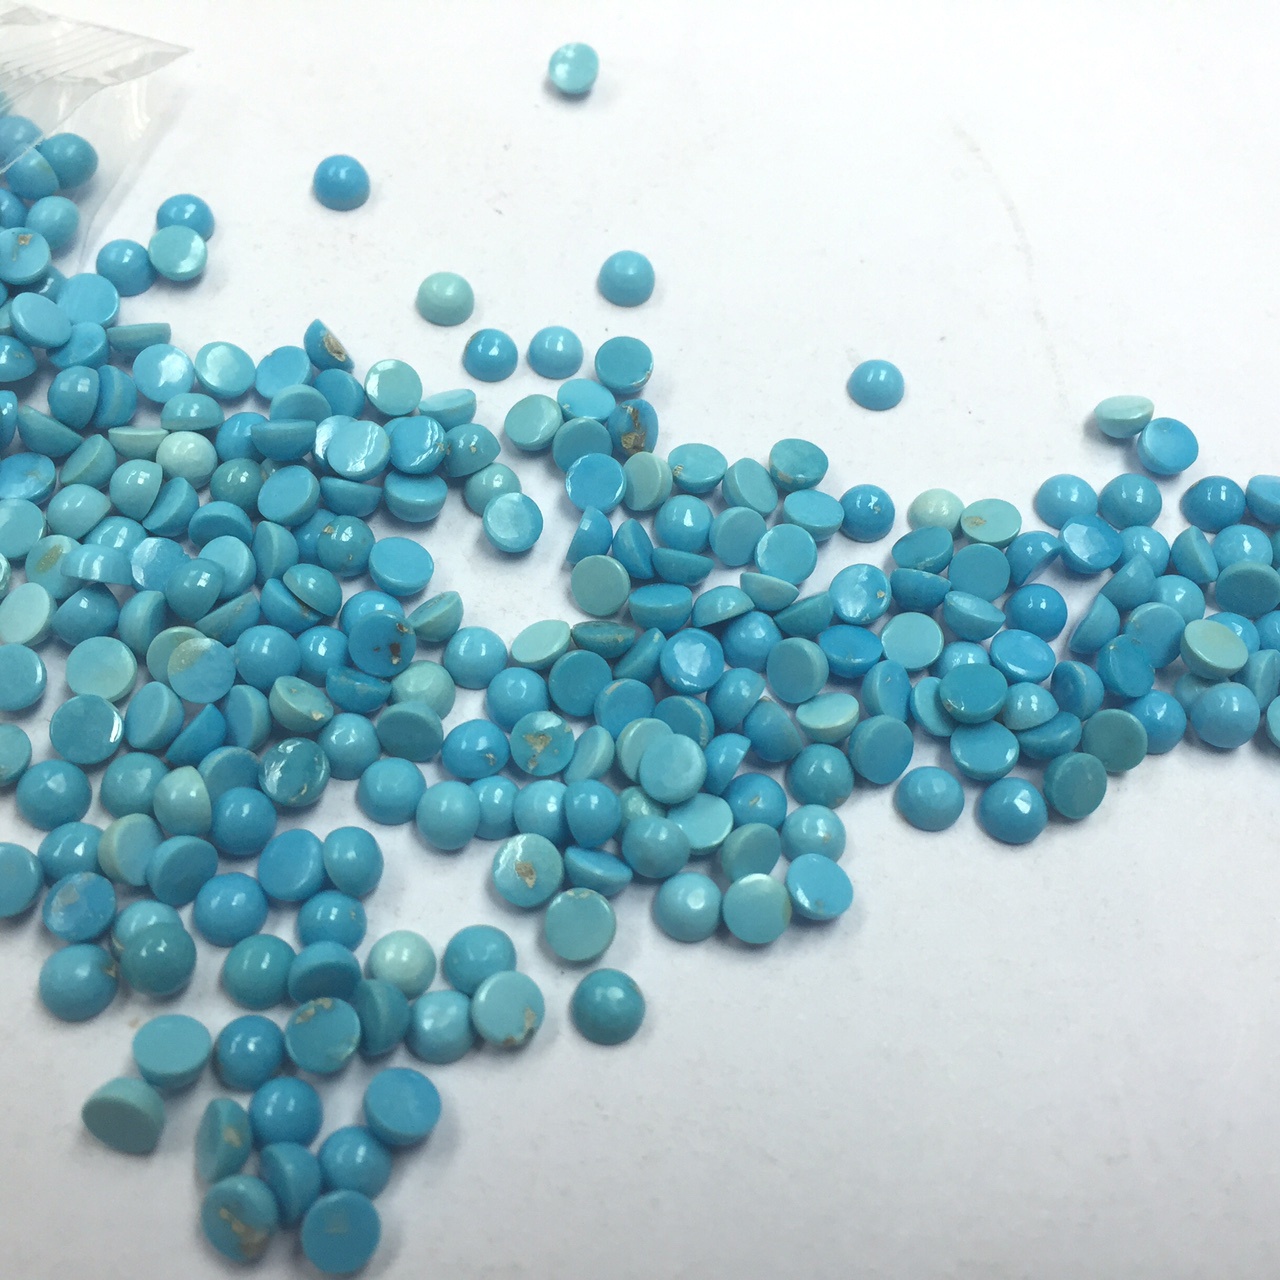 2mm, 3mm, 4mm, 5mm turquoise cabochons